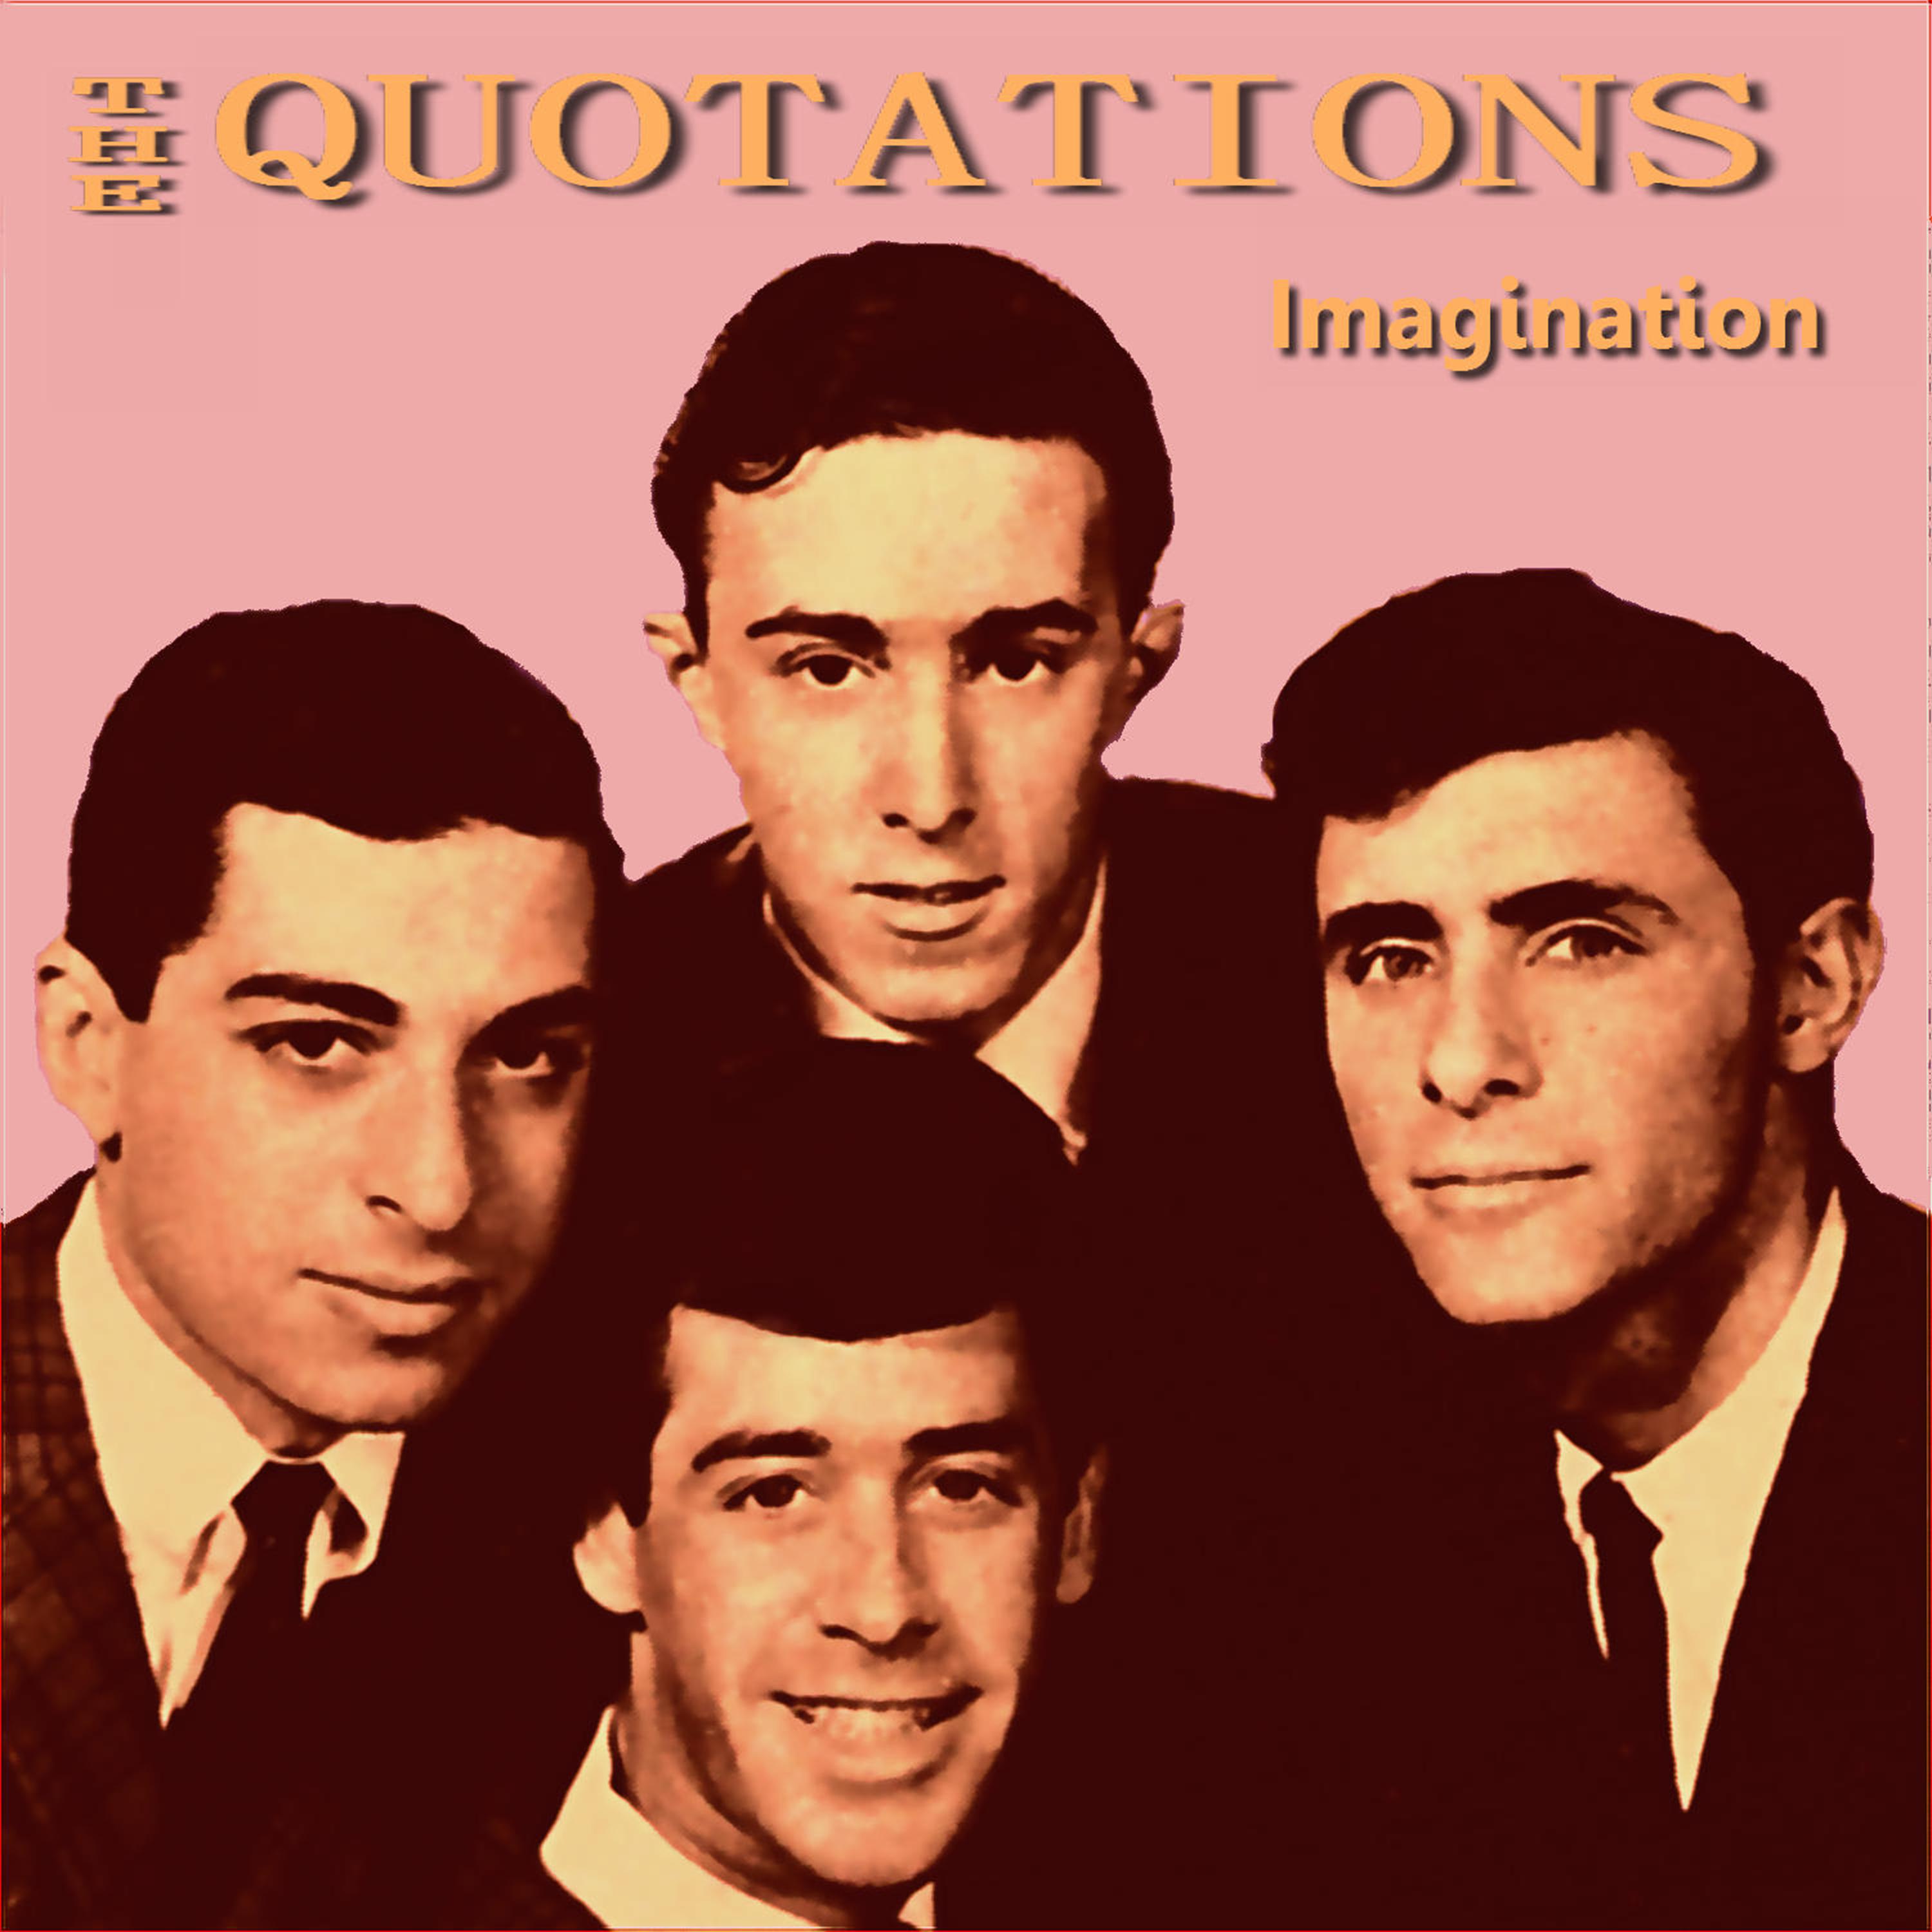 The Quotations - We'll Reach Heaven Together